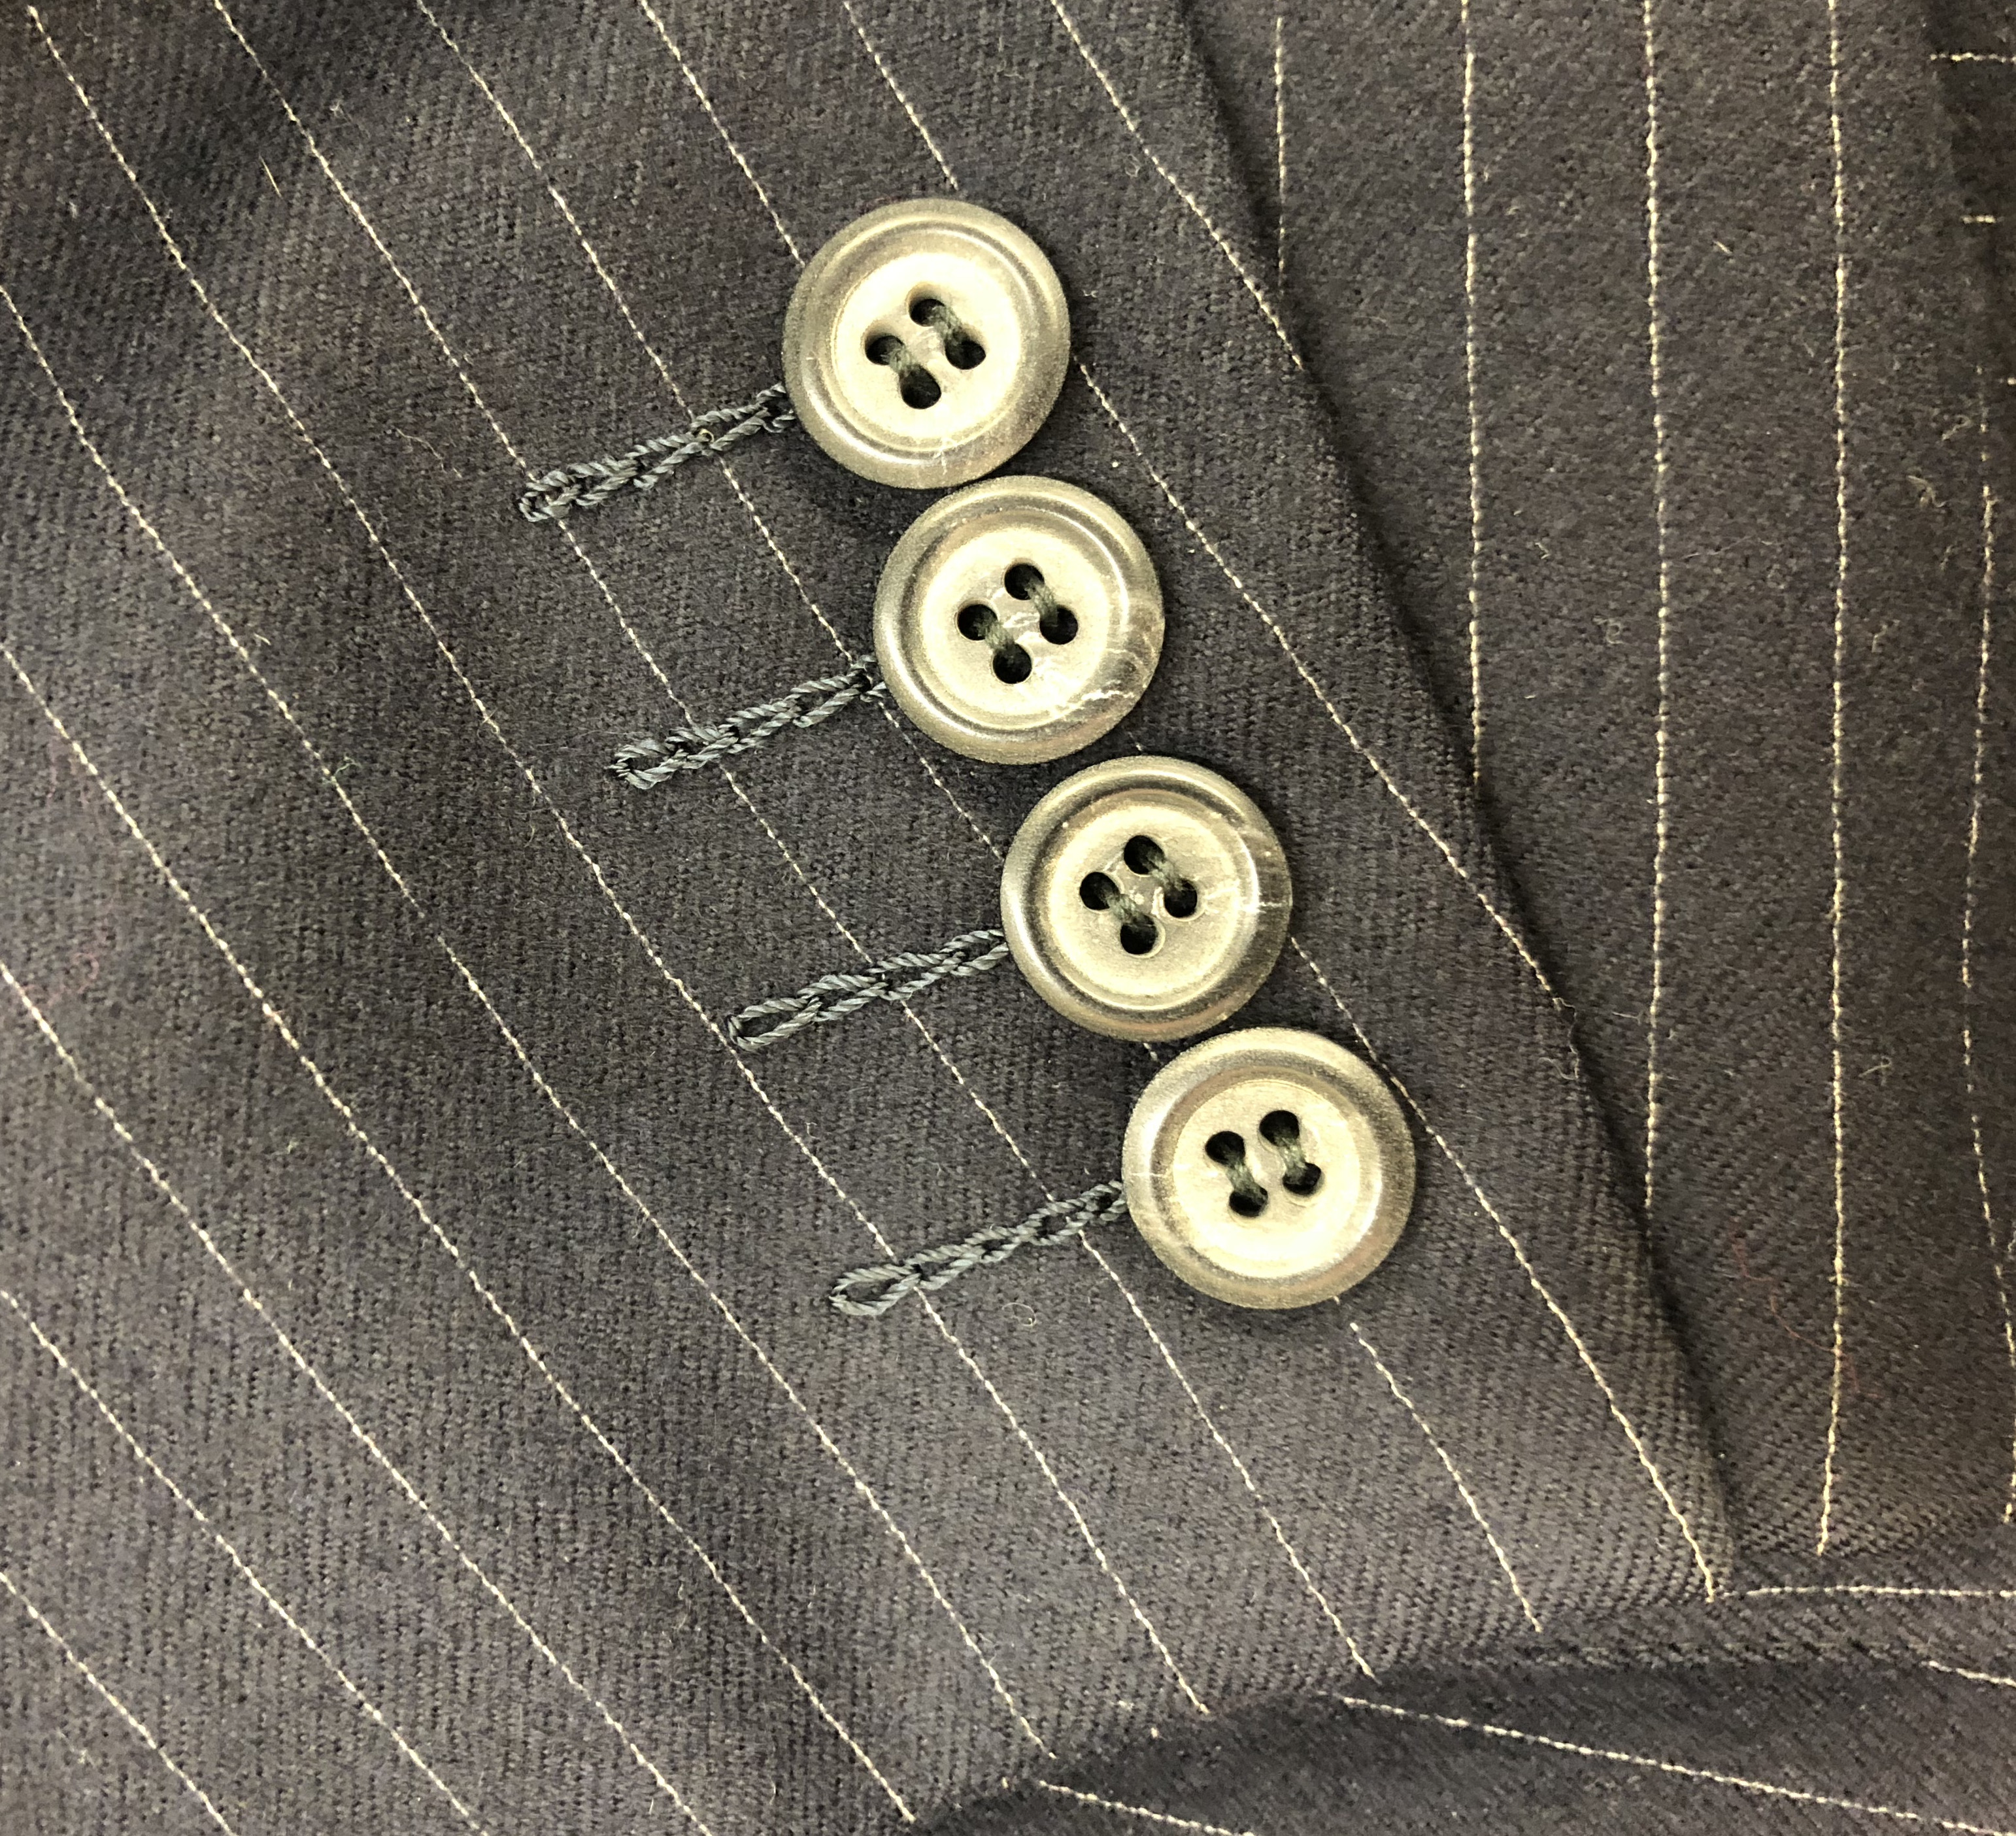 www.theGenuineGentleman.com Suit Quality Hallmarks - Suit faux loop buttonhole stitching